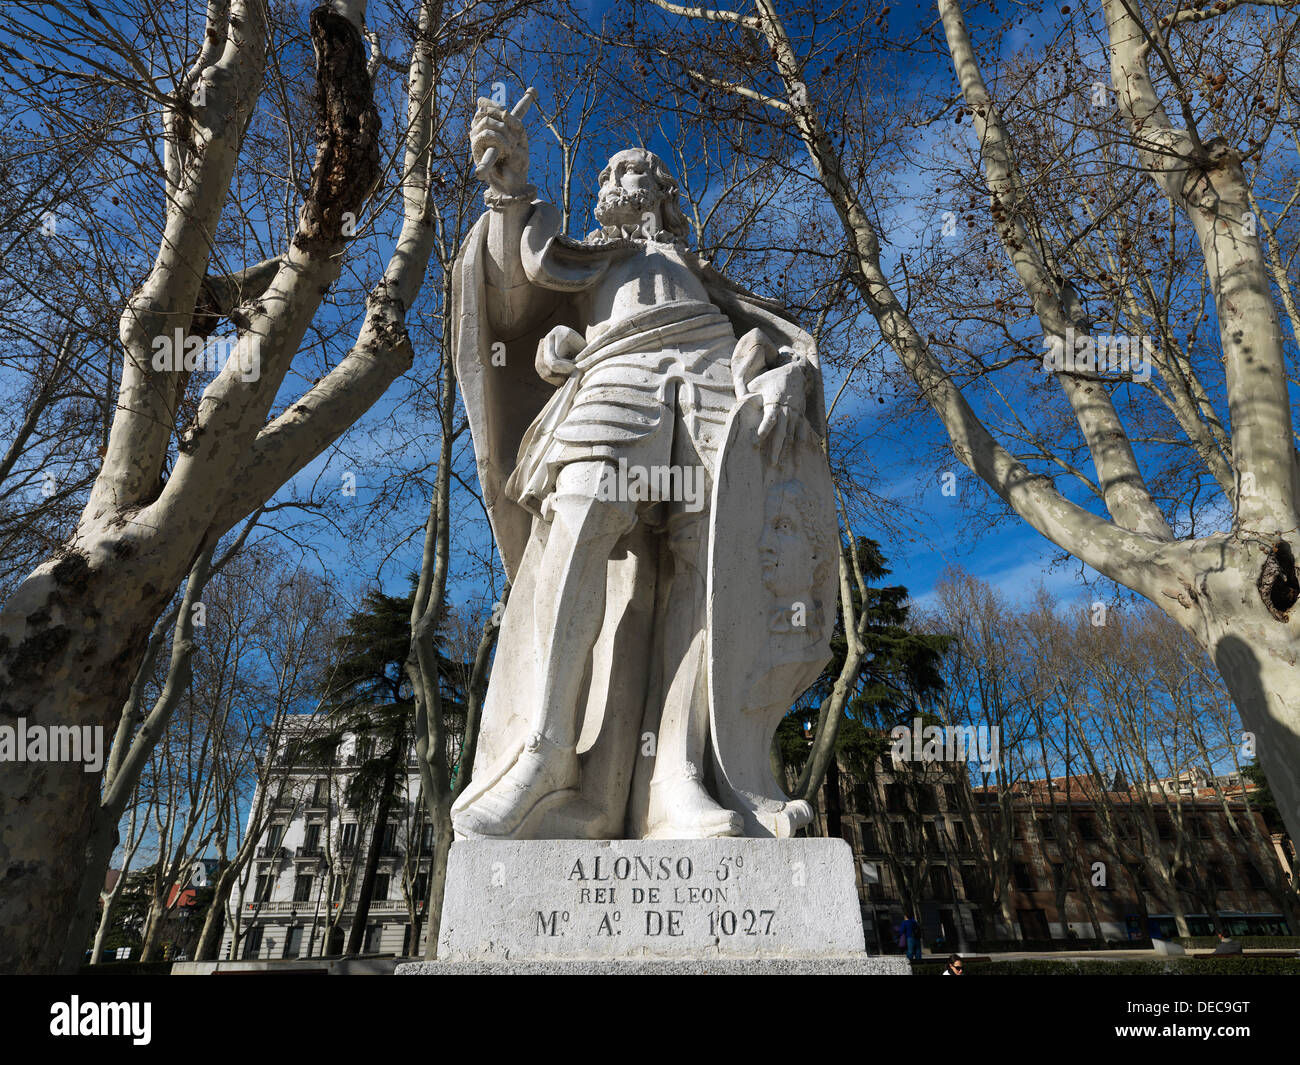 Madrid, Spain, Statue V. Alonso, Rei de Leon, in the park in front of the Palace of King lichen Stock Photo